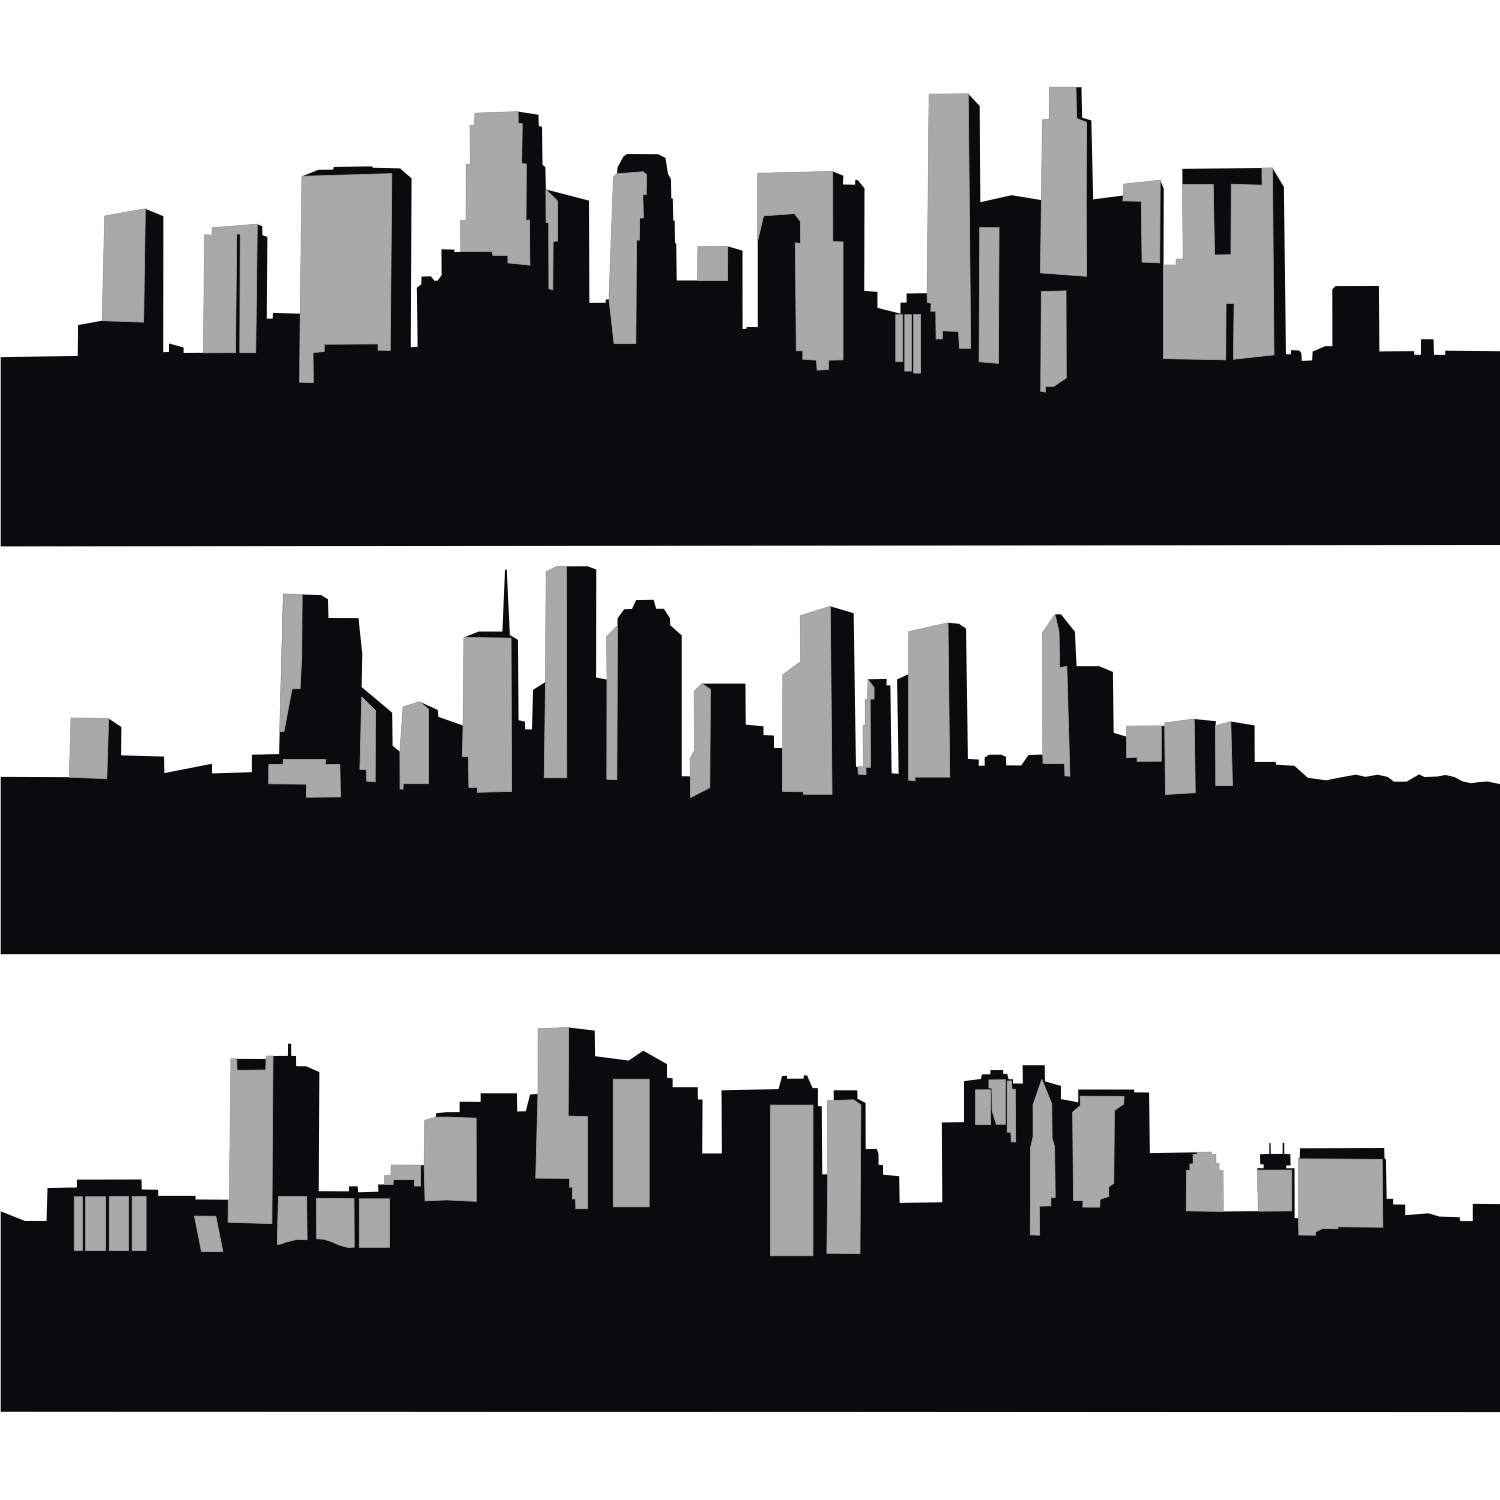 Free Vector Description: City skyline. Free vector illustration. License: Free for commercial use